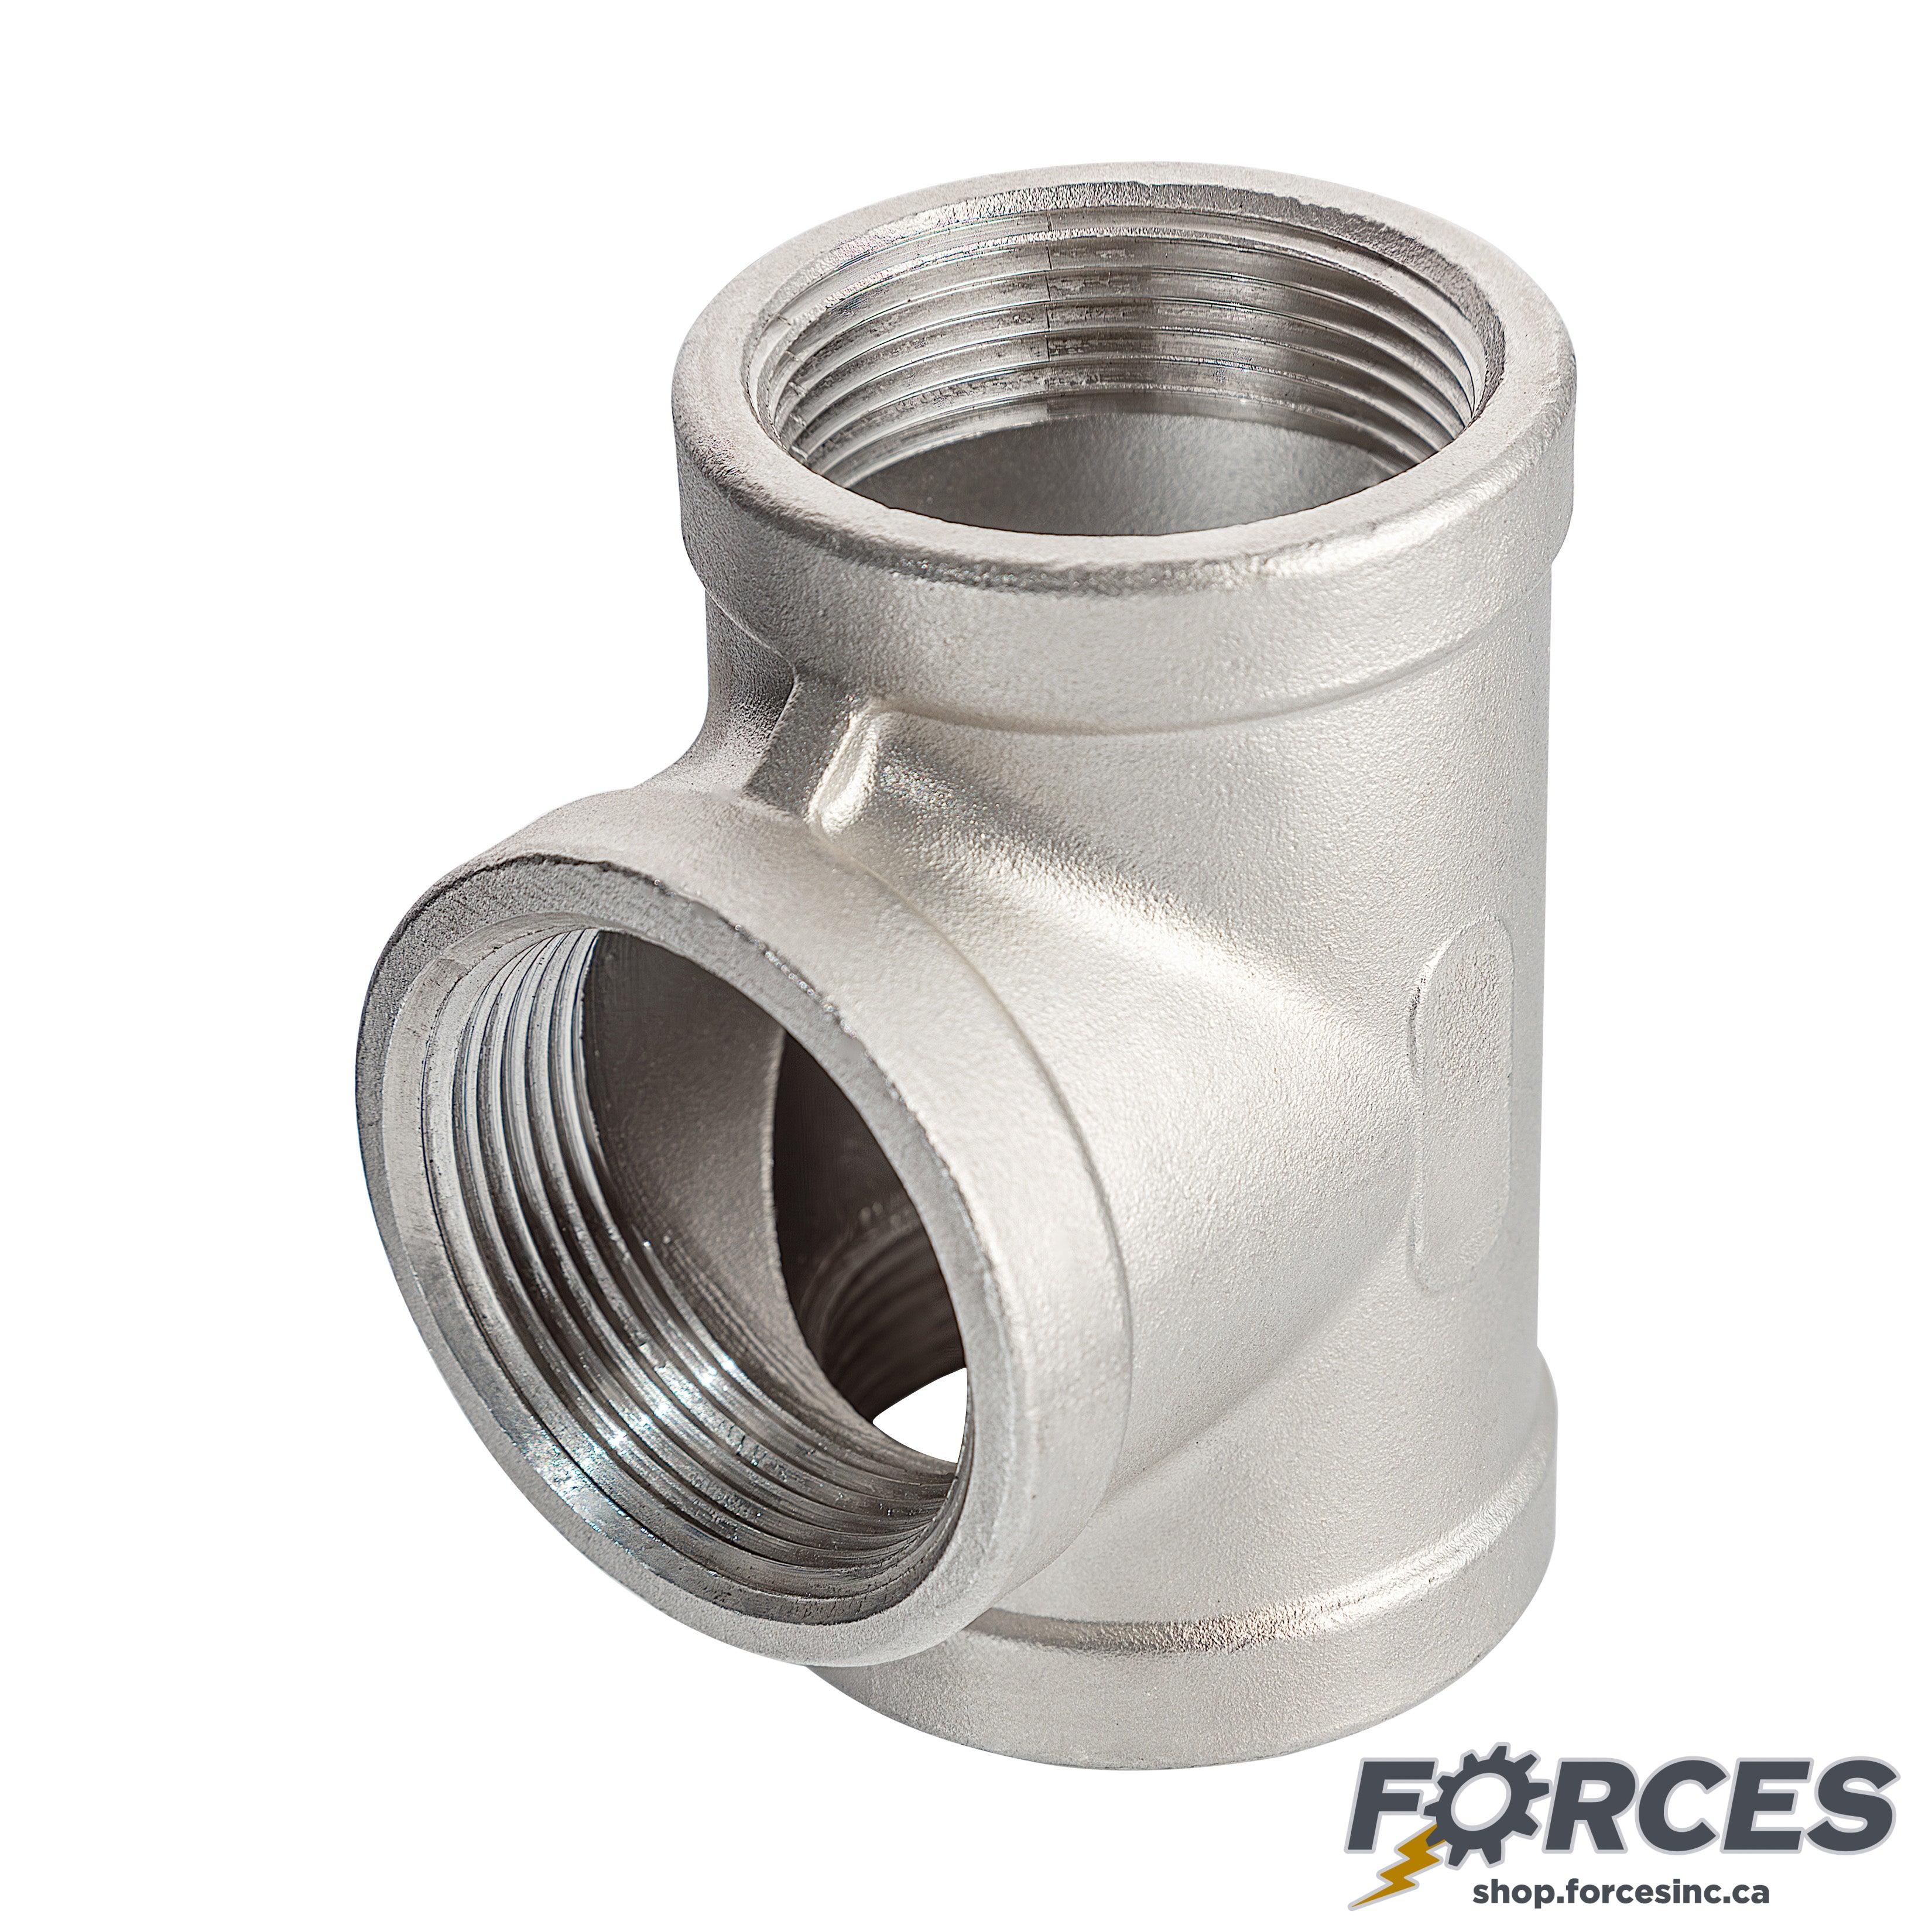 1/8" Tee NPT #150 - Stainless Steel 316 - Forces Inc